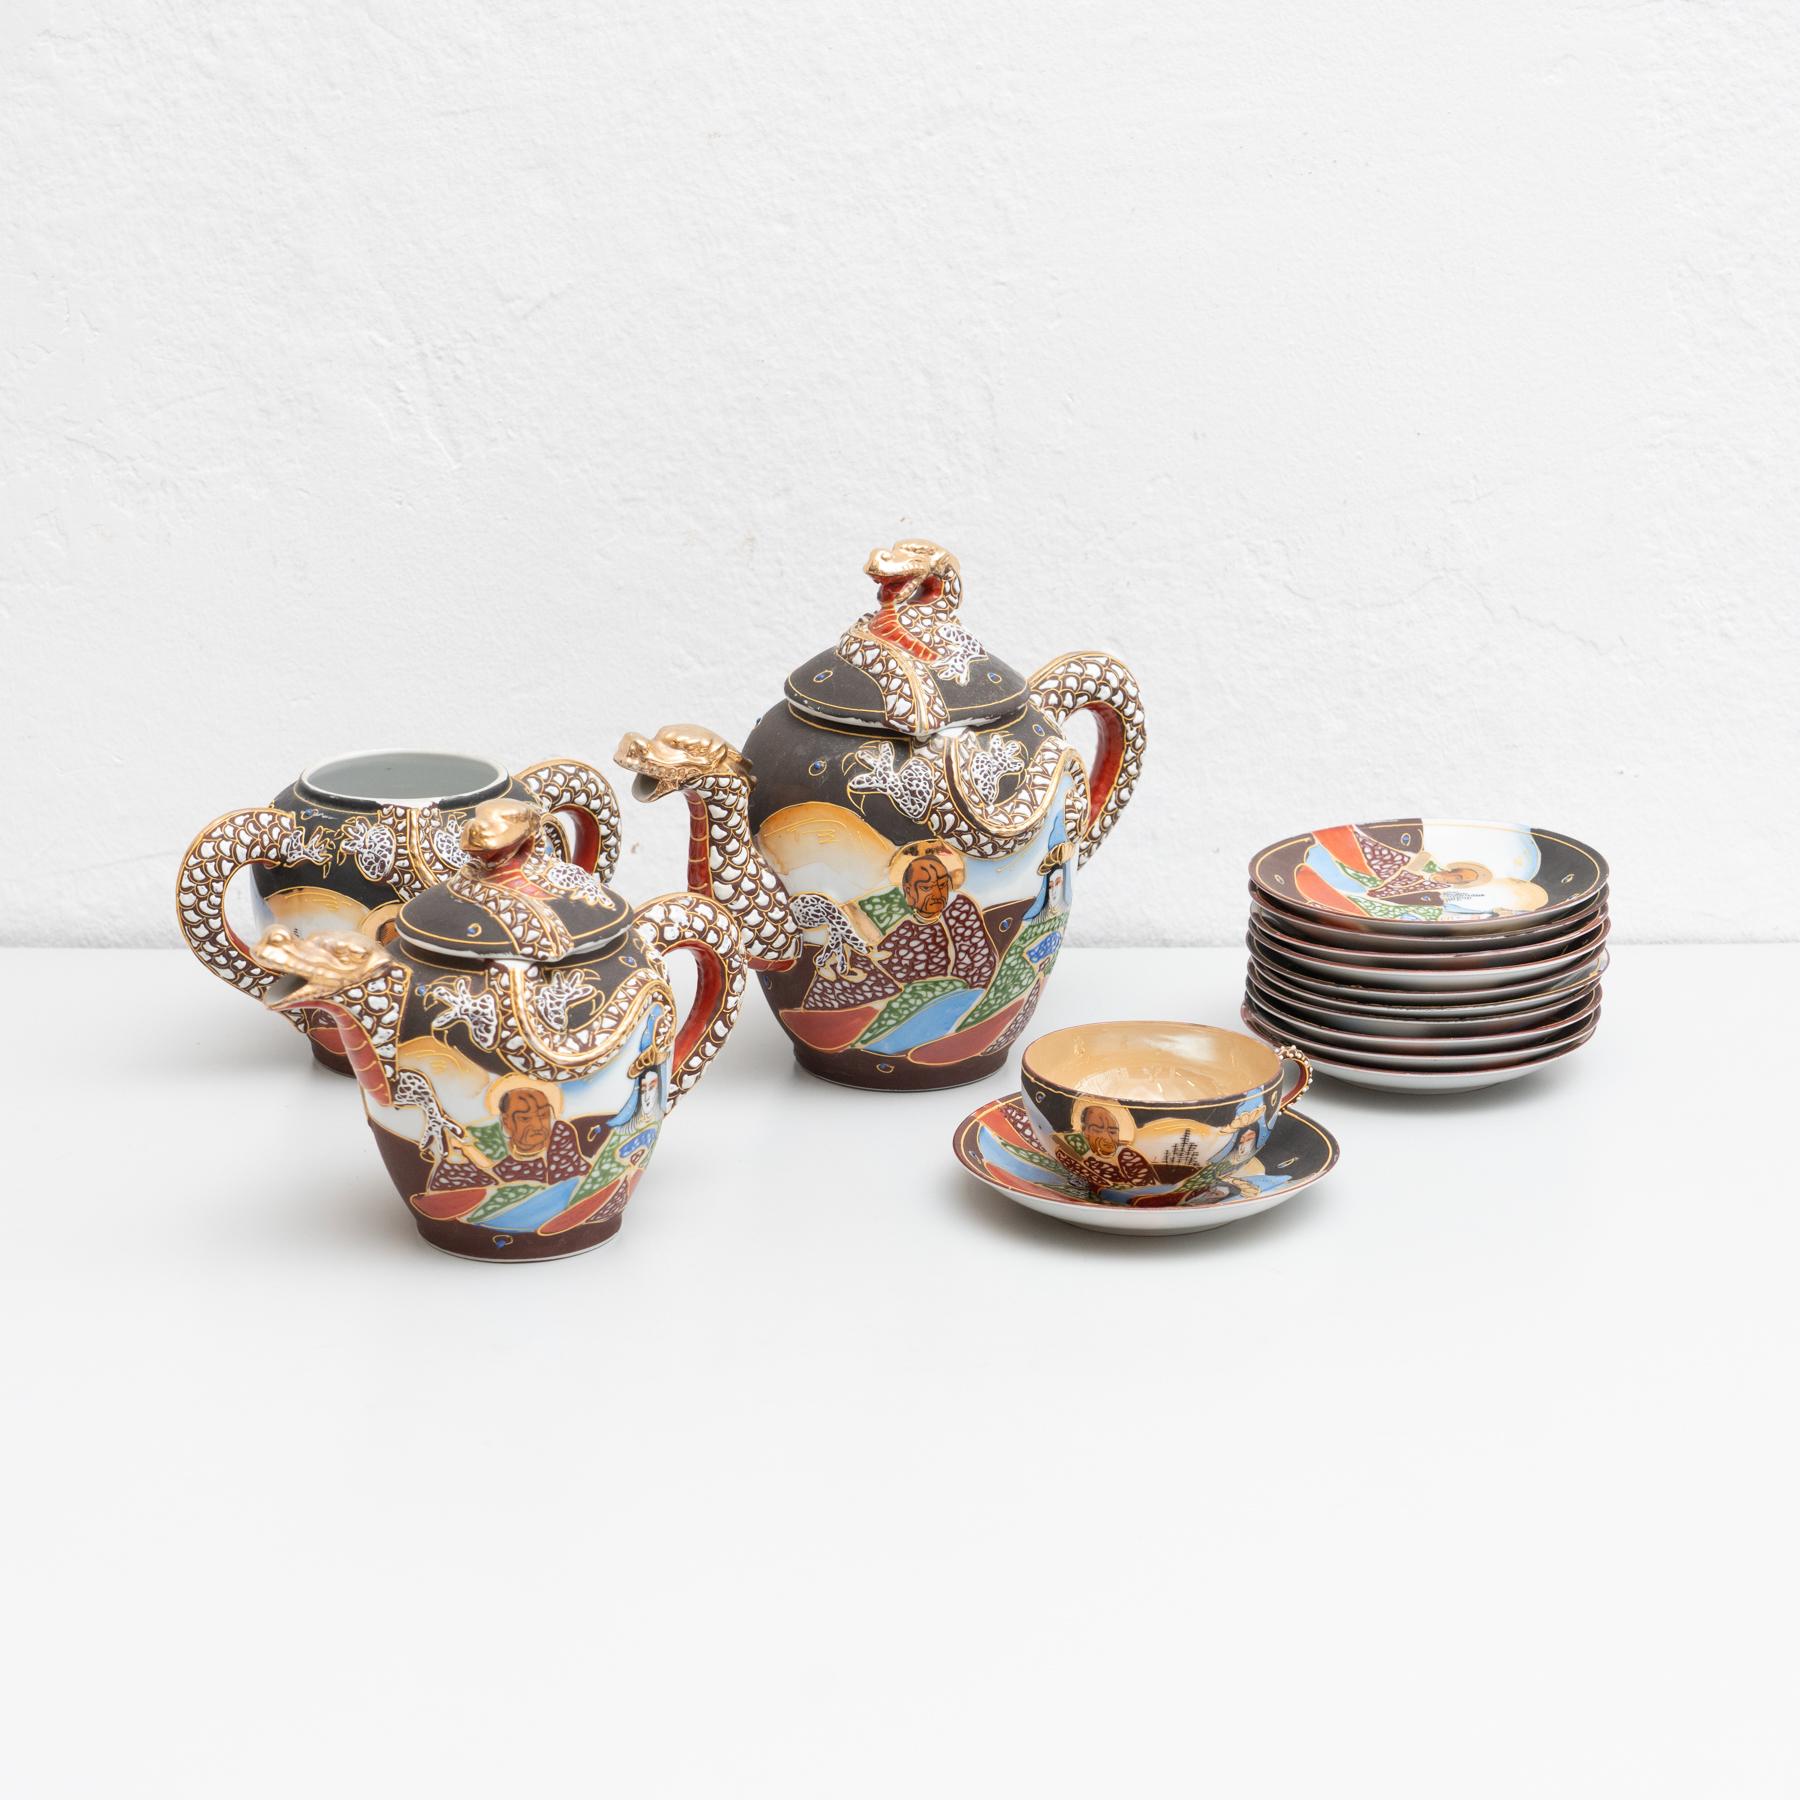 Antique tea set consistent of 23 pieces including tea plates, tea cups and tea. 

Hand painted in the traditional Japanese style.

Made by an unknown manufacturer in Japan.

Original Japanese origin stamped.

In original condition, with